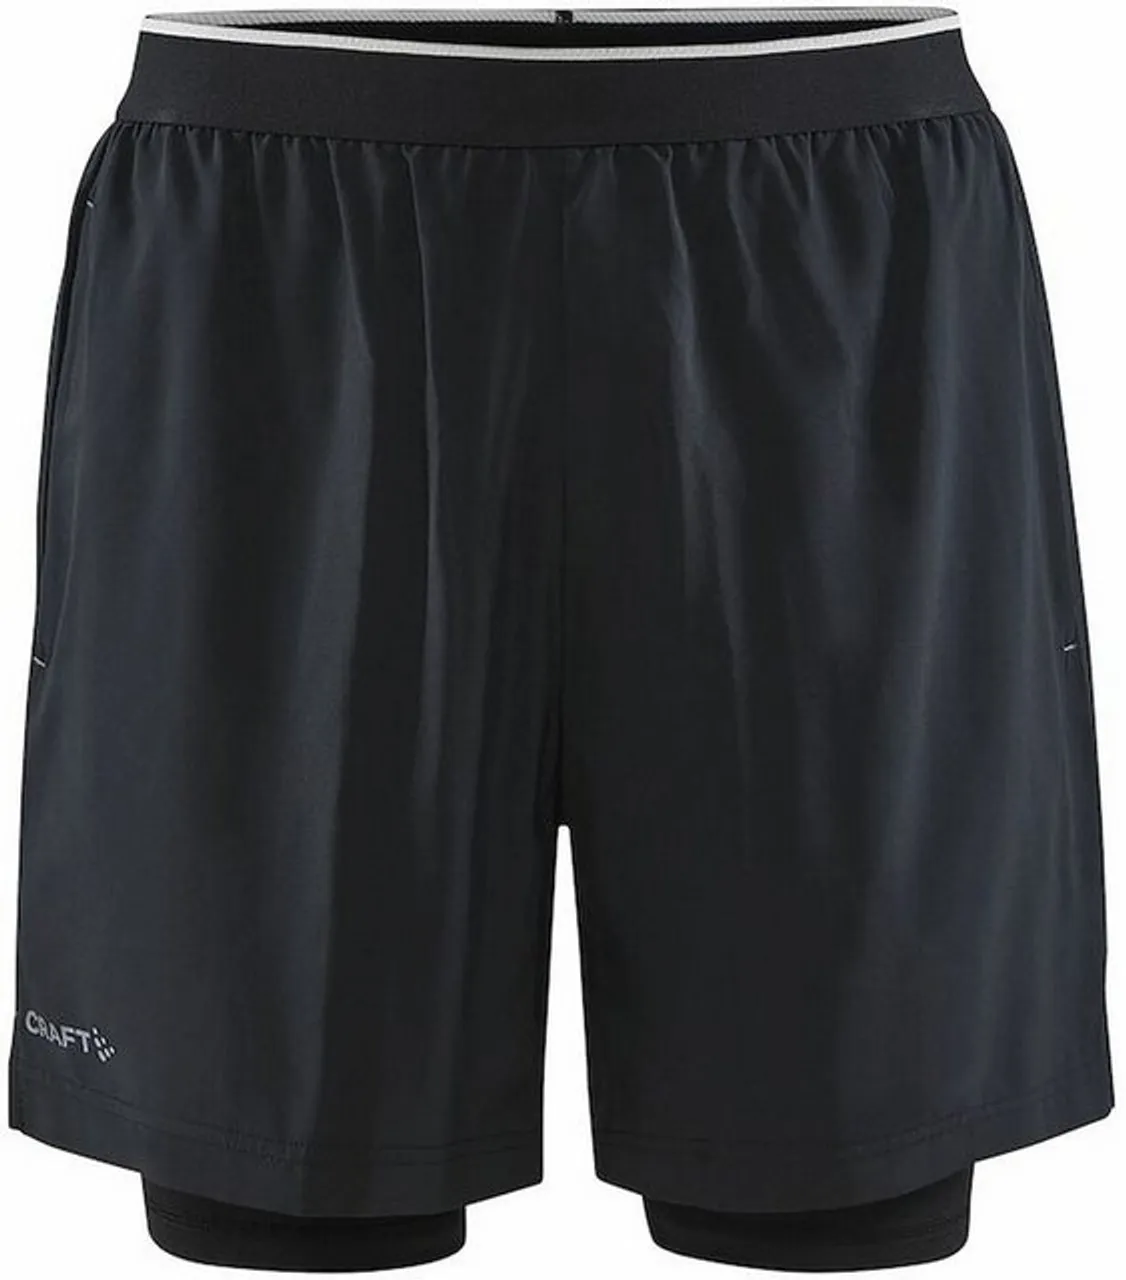 Craft Shorts ADV ESSENCE PERFORATED 2-IN-1 STRETCH SH Black